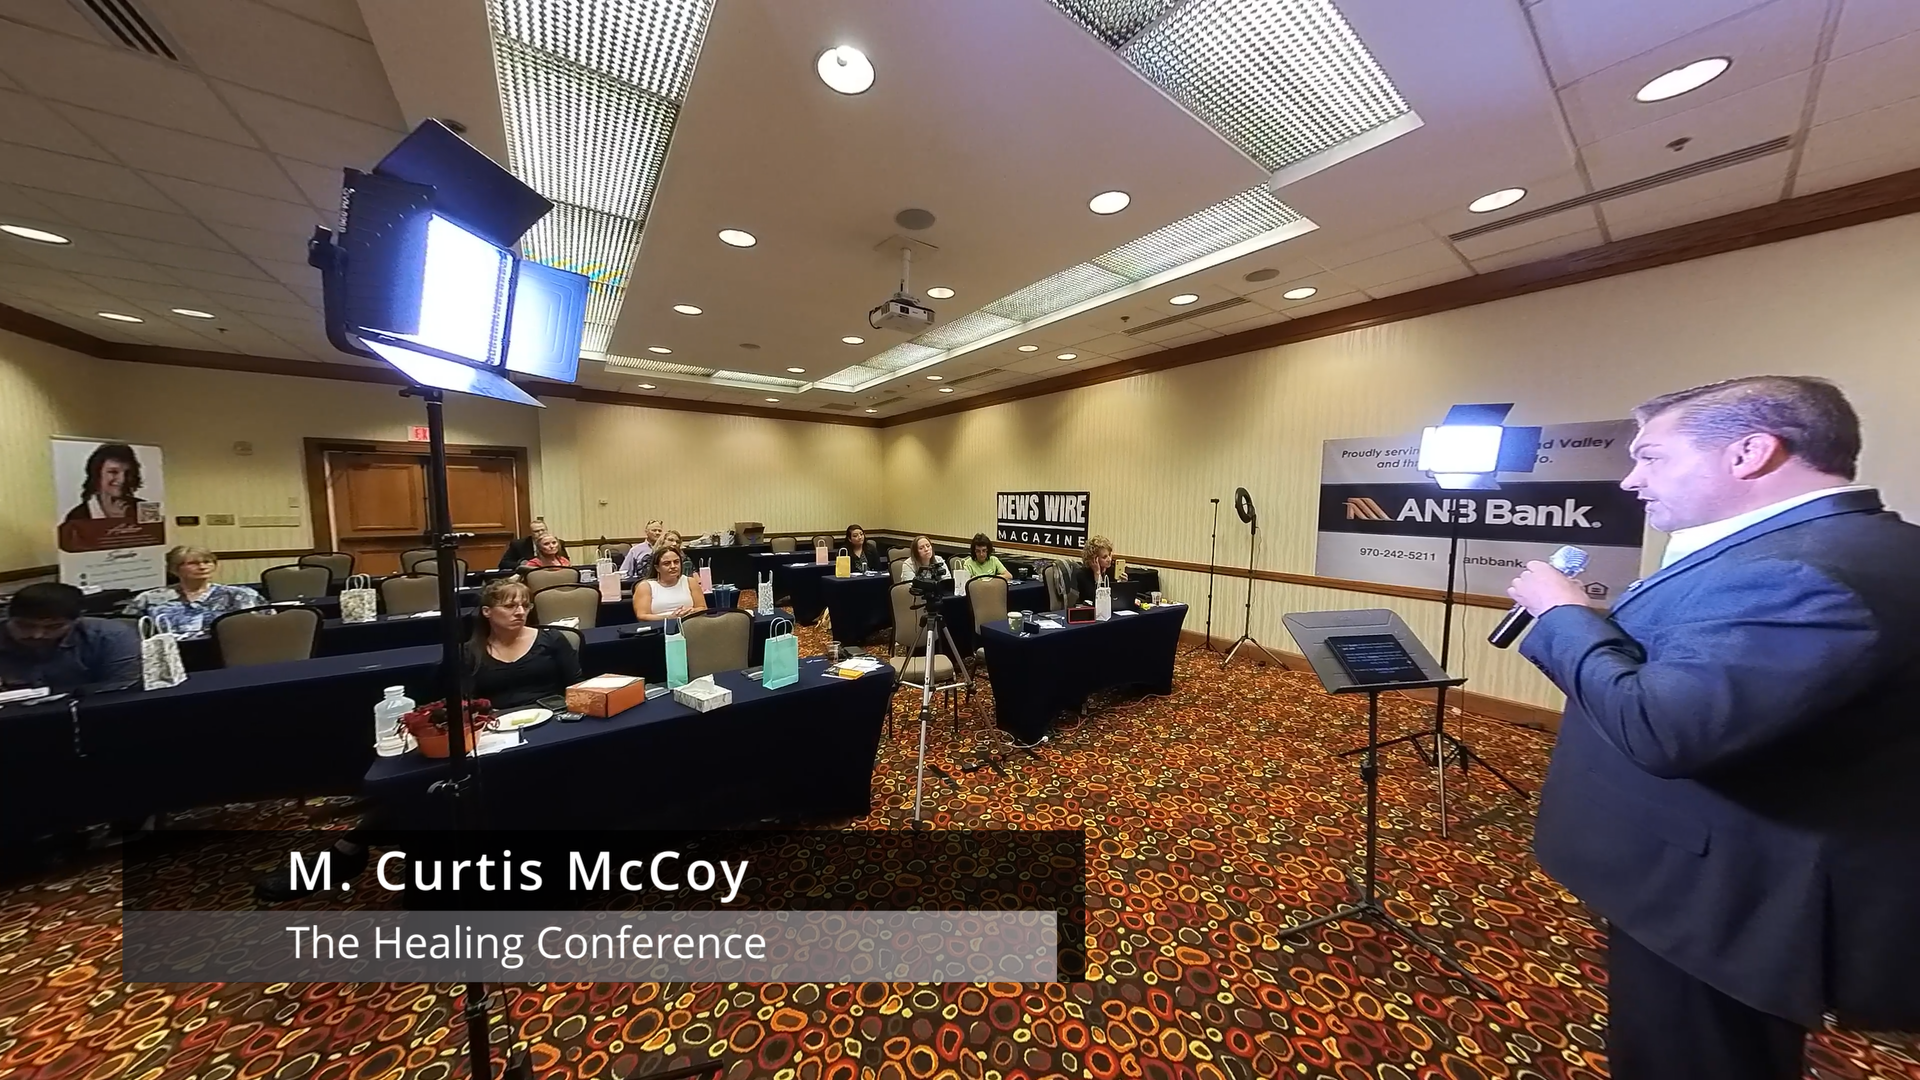 M. Curtis McCoy speaking at The Healing Conference